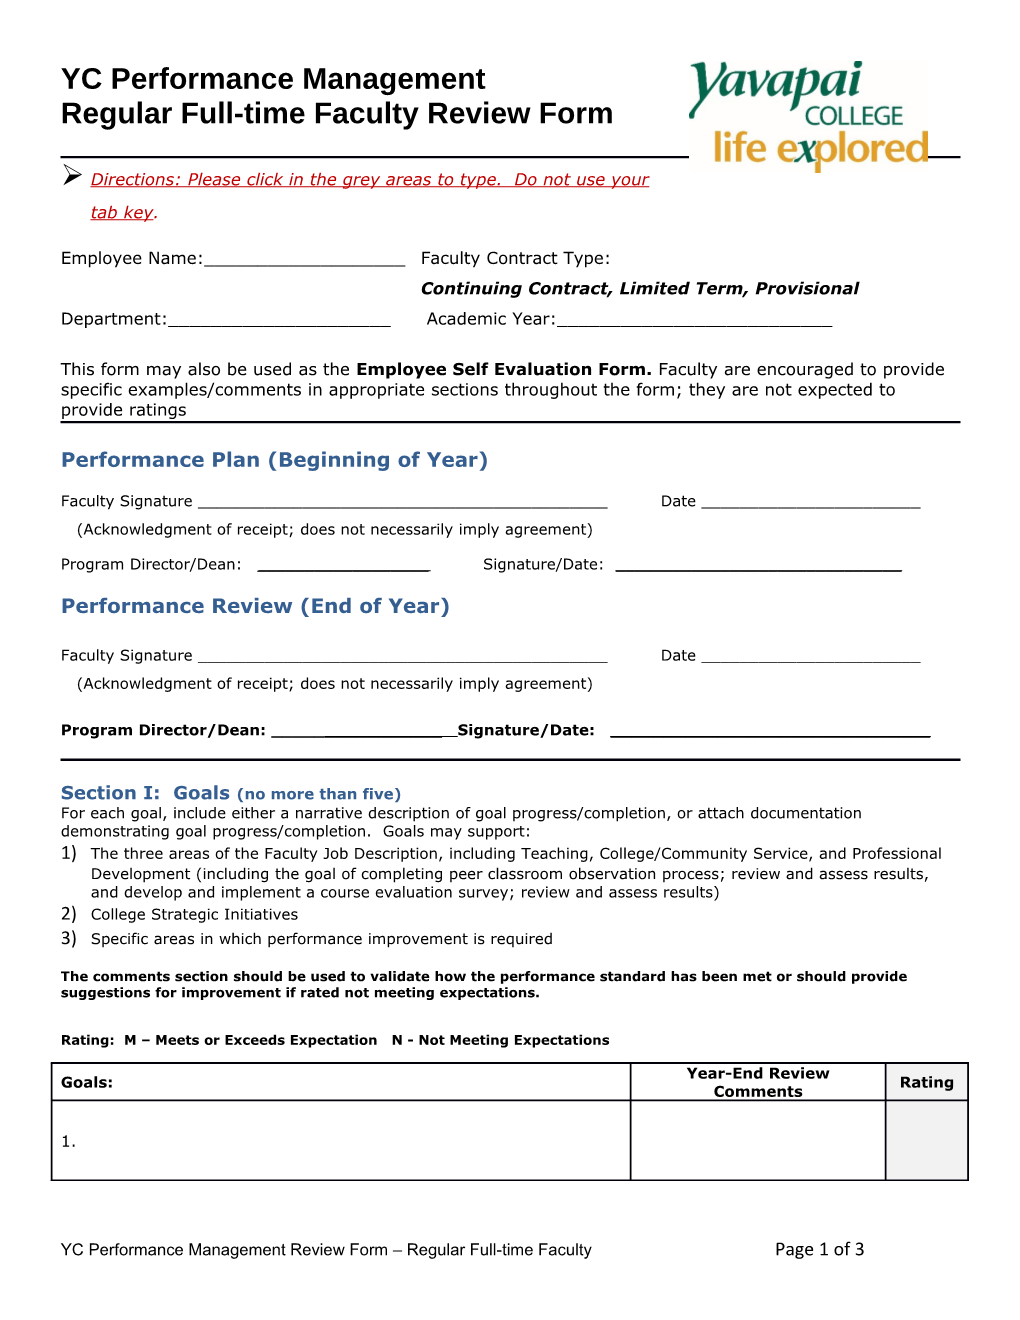 Regular Full-Time Faculty Review Form